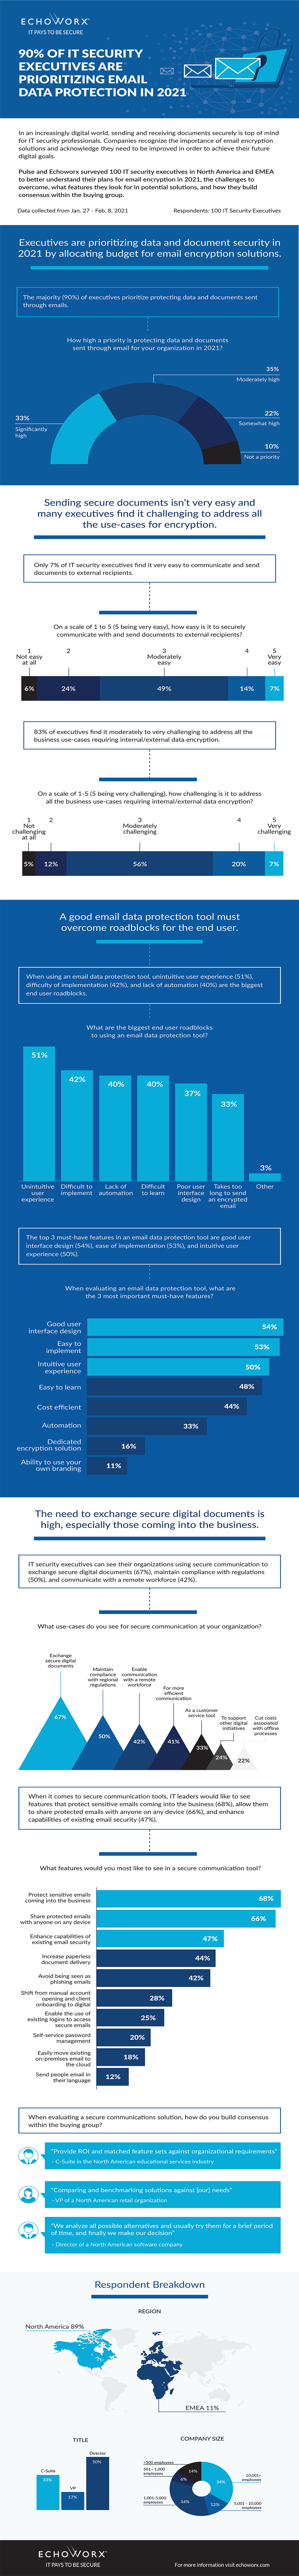 90% of organisations prioritizing email encryption in 2021 — infographic